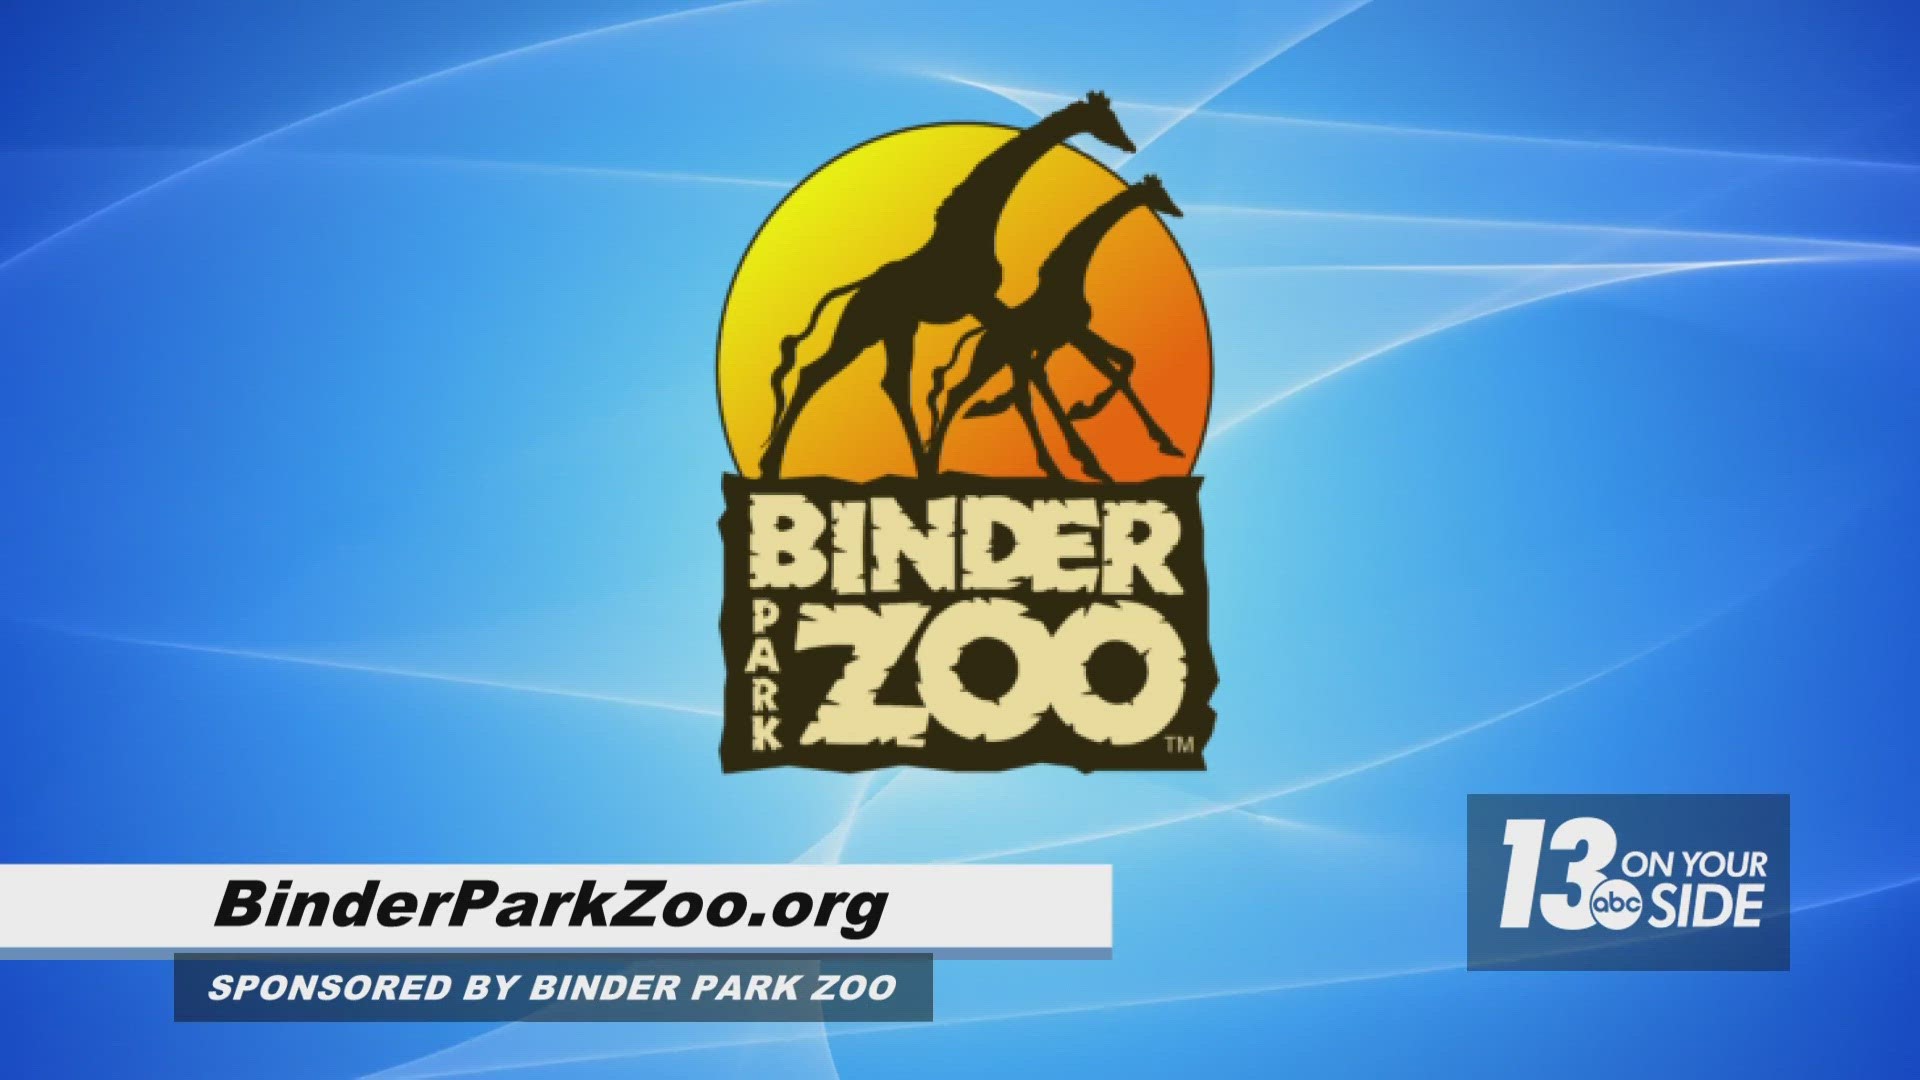 Binder Park Zoo in Battle Creek has been enjoying a summer of new construction, new animals, and plenty of new thrills.